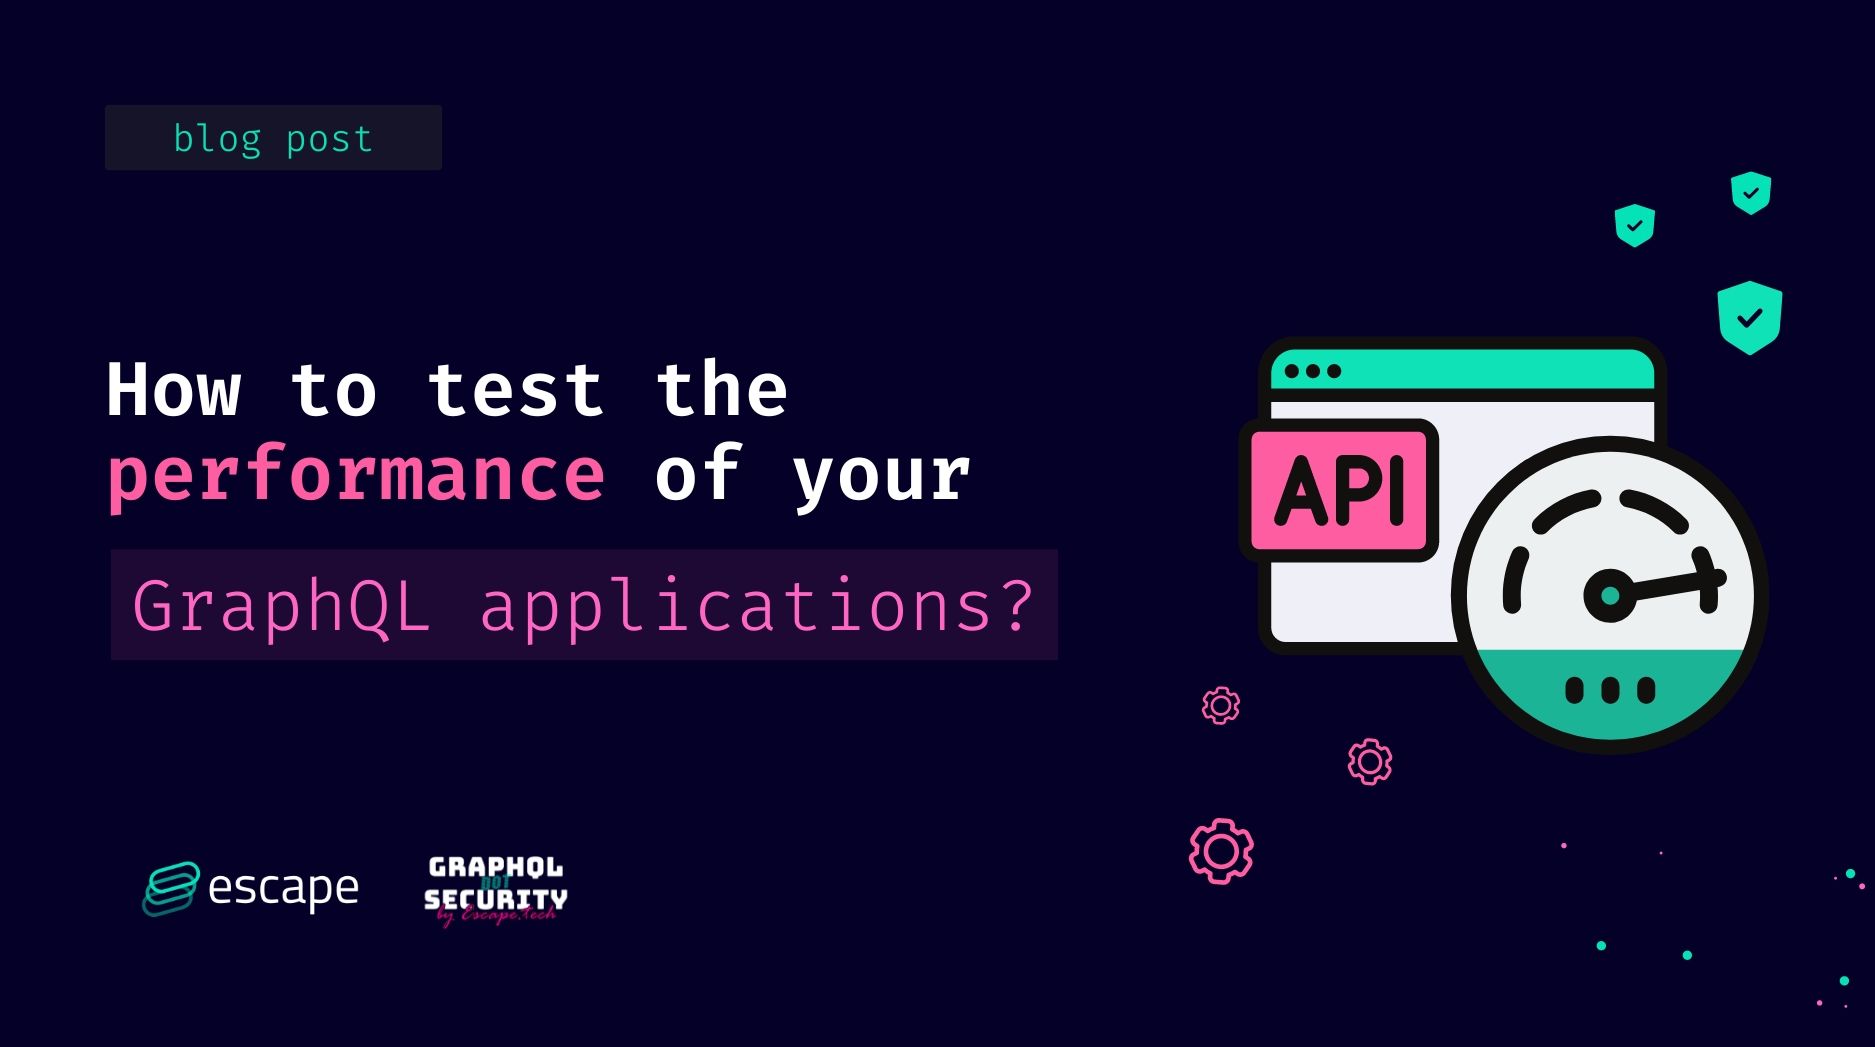 Ensure the performance of your GraphQL applications with automated load testing